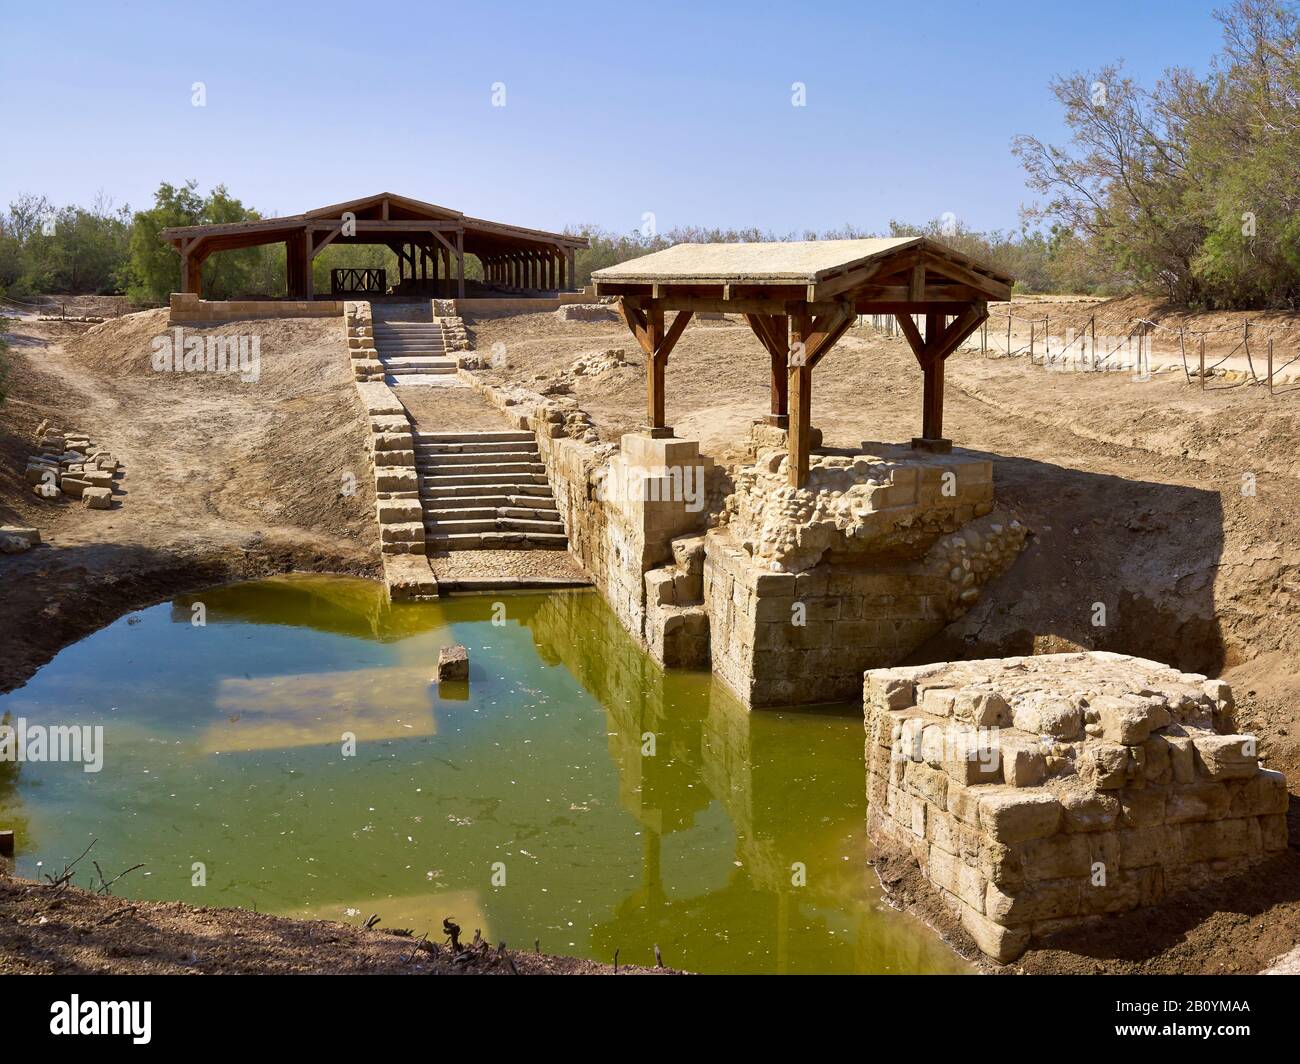 Baptism site of Jesus, excavation on the side arm of the Jordan with old church ruins, Bethany, Balqa Province, Jordan, Middle East, Stock Photo